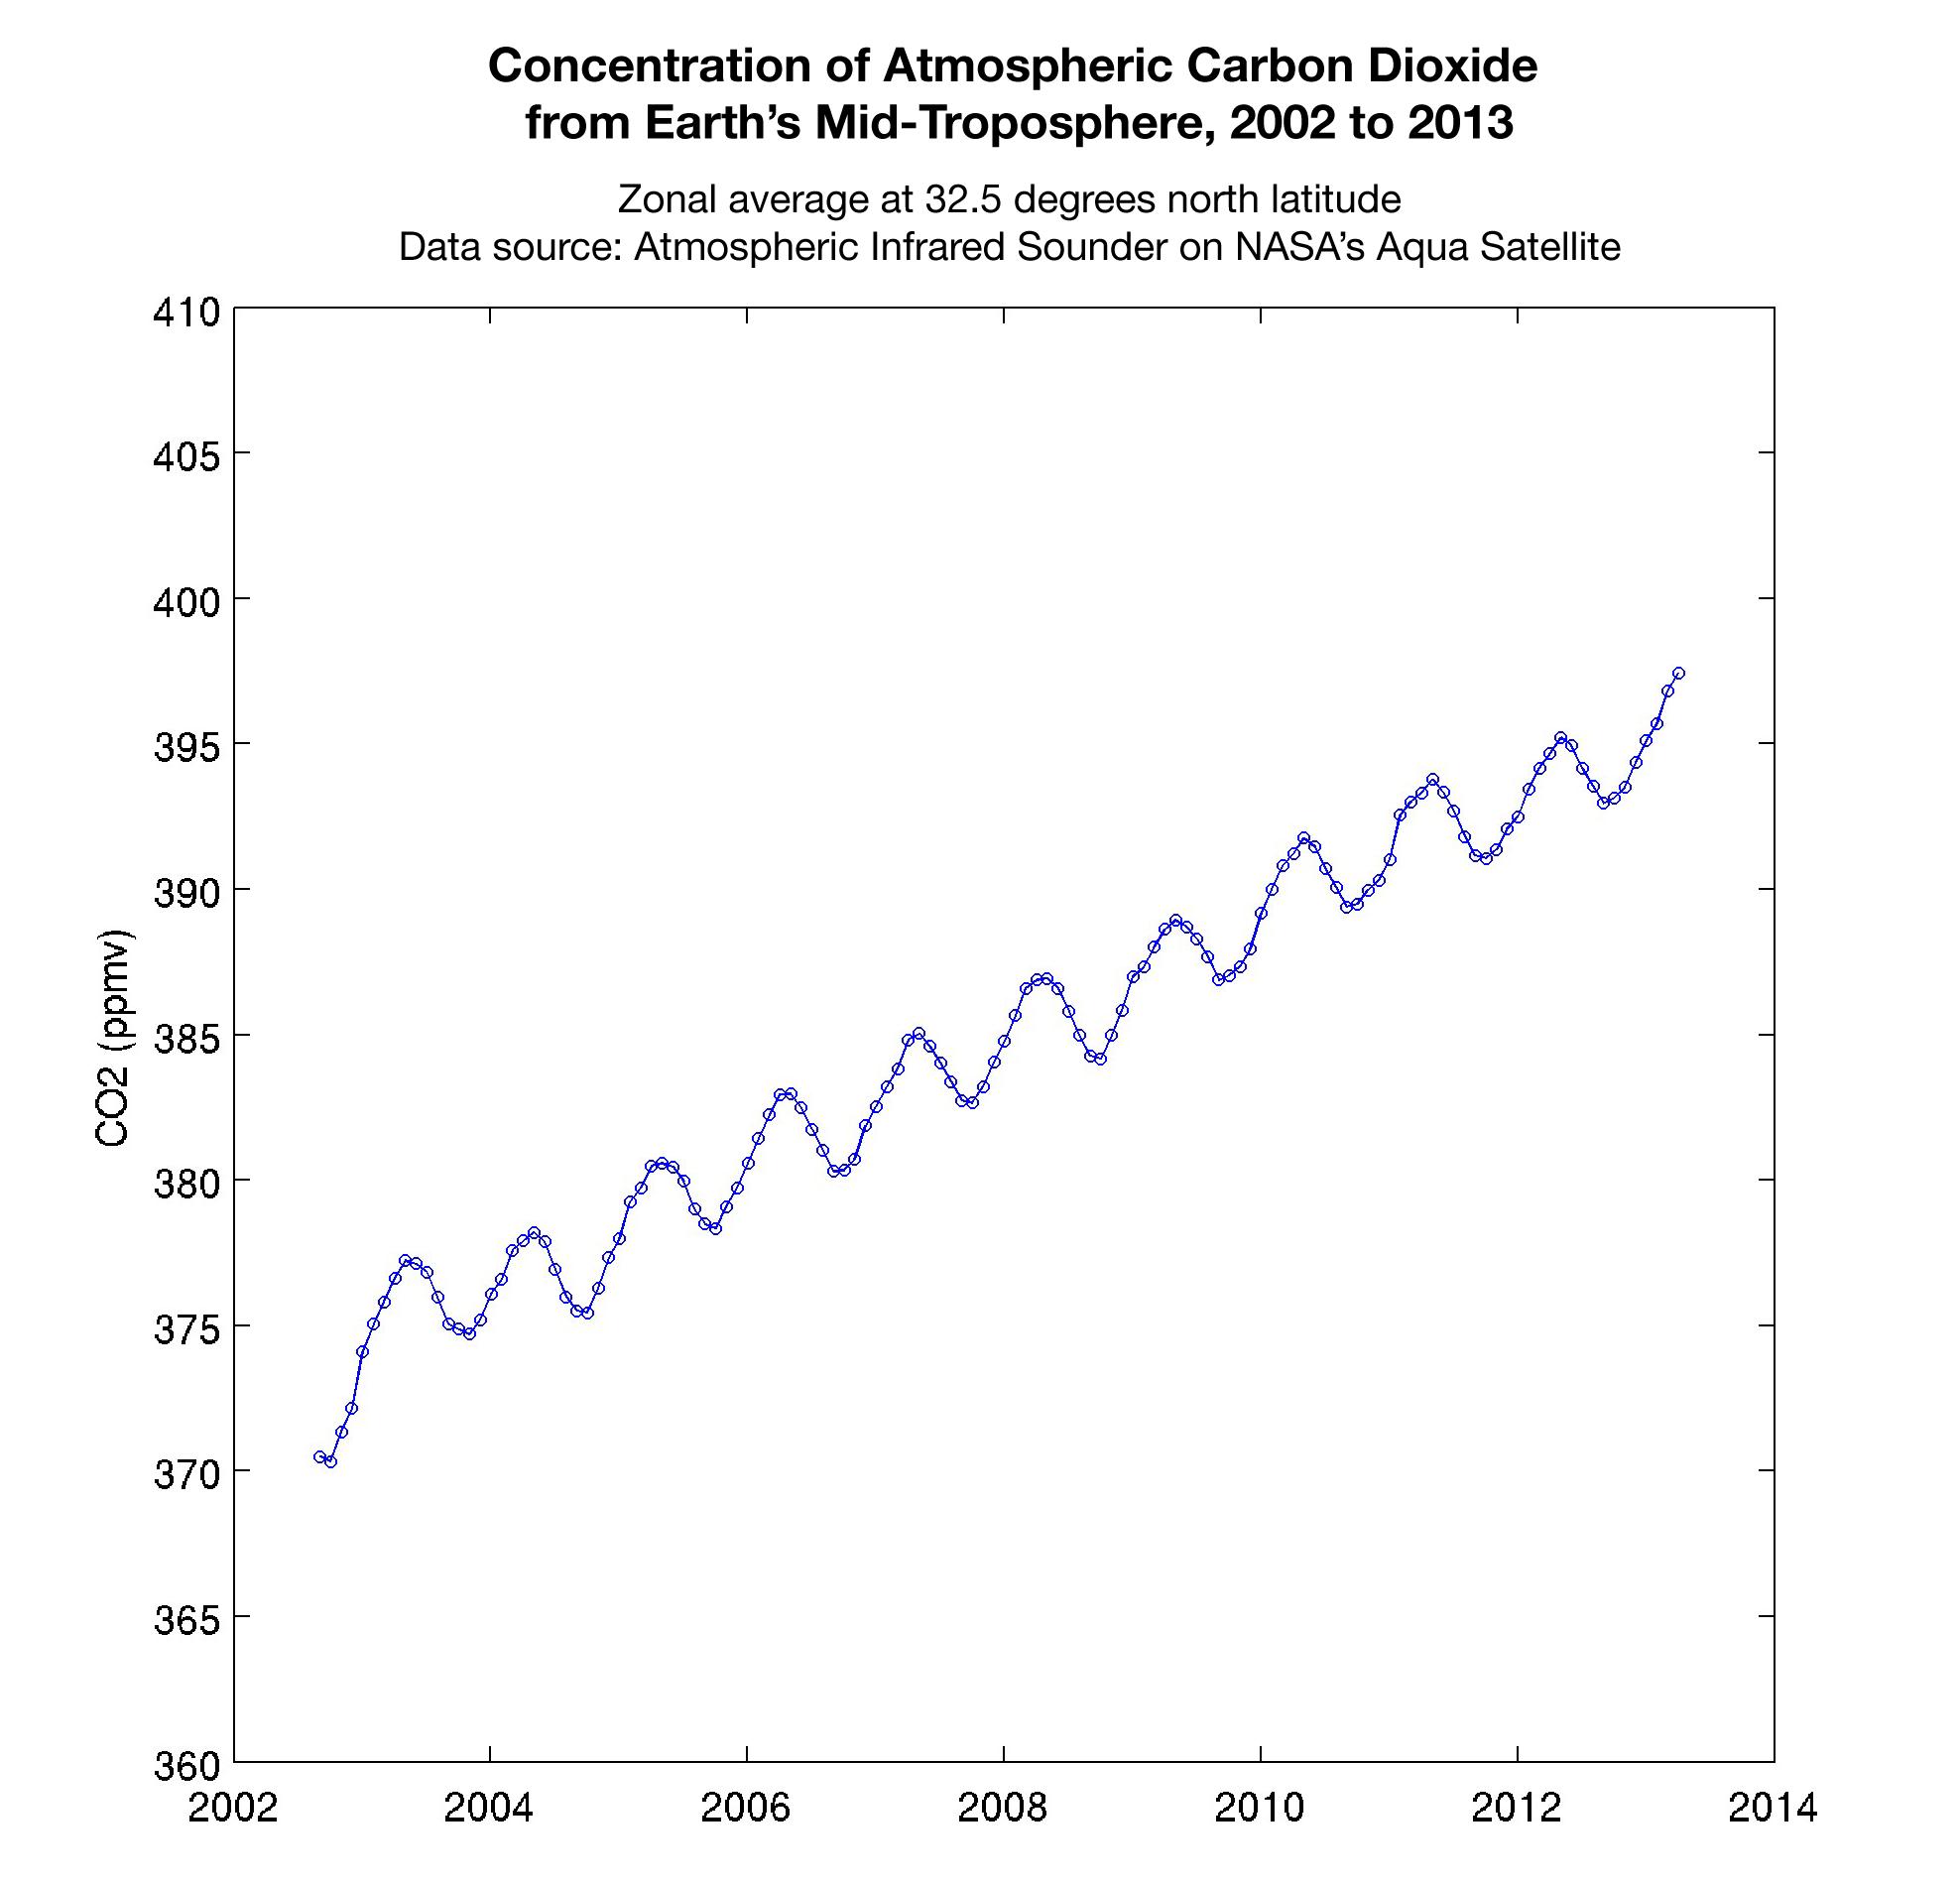 Concentration of Atmospheric Carbon Dioxide from Earth's Mid-Troposphere, 2002 to 2013